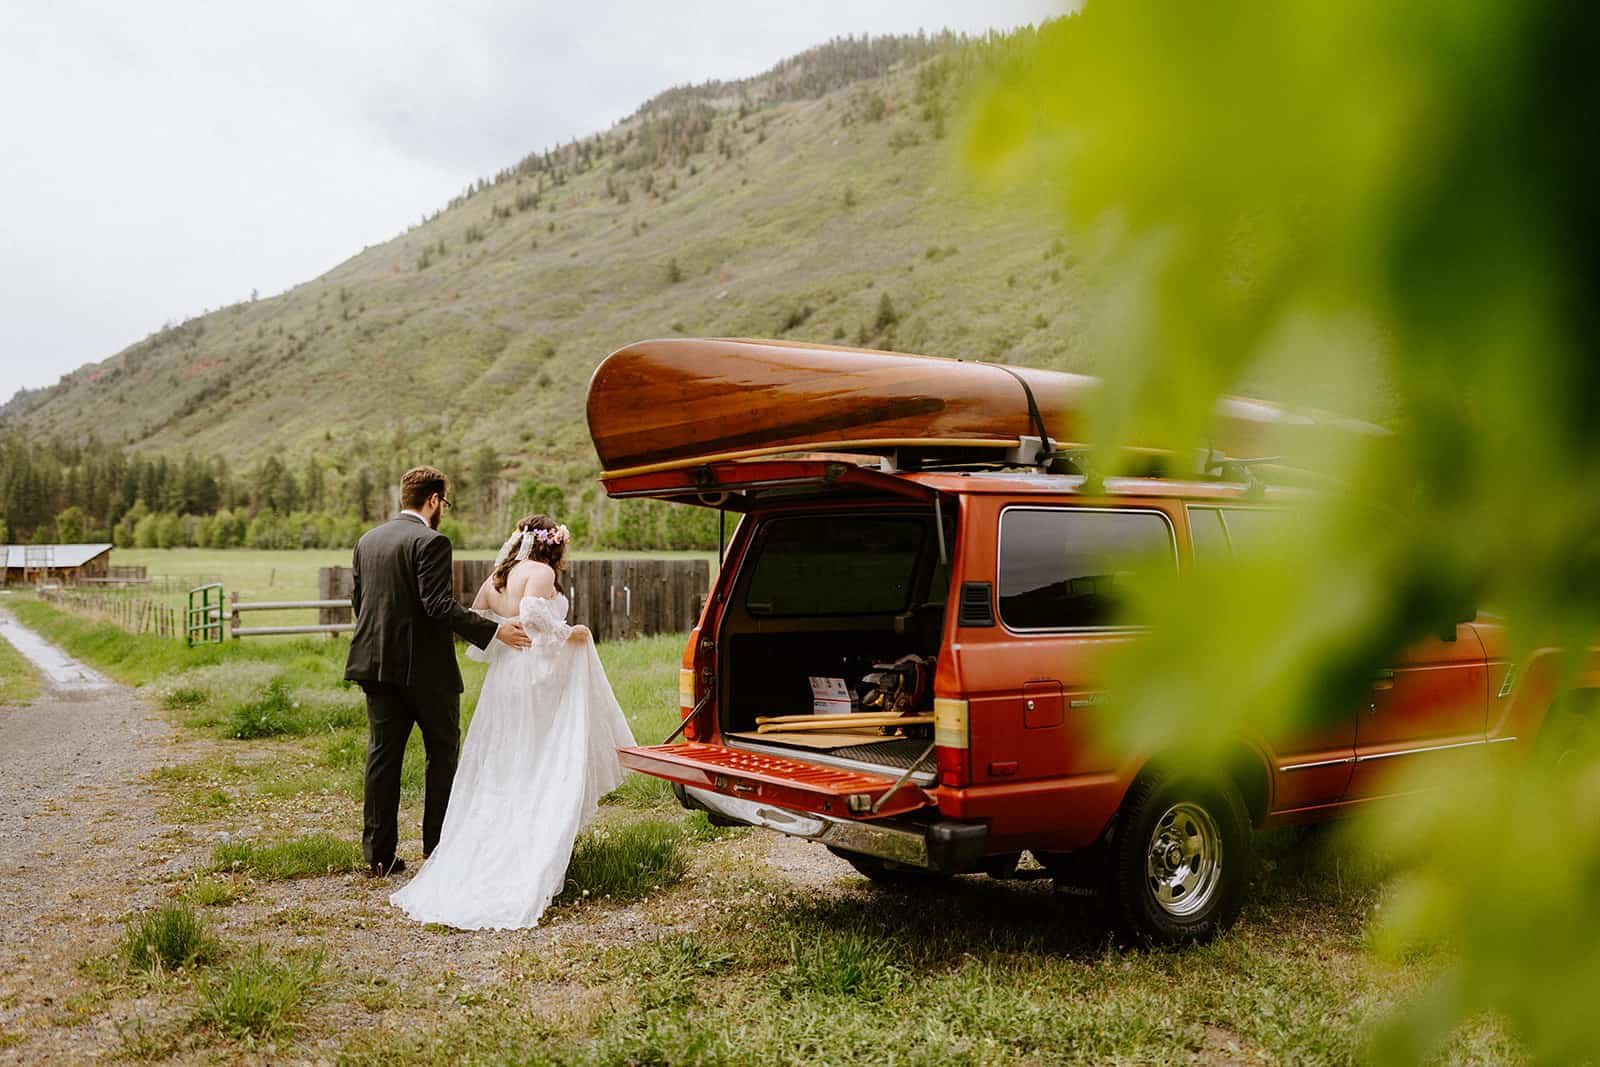 A man and woman walk around a red Toyota Land Cruiser with a wood canoe strapped to the roof in their wedding clothes